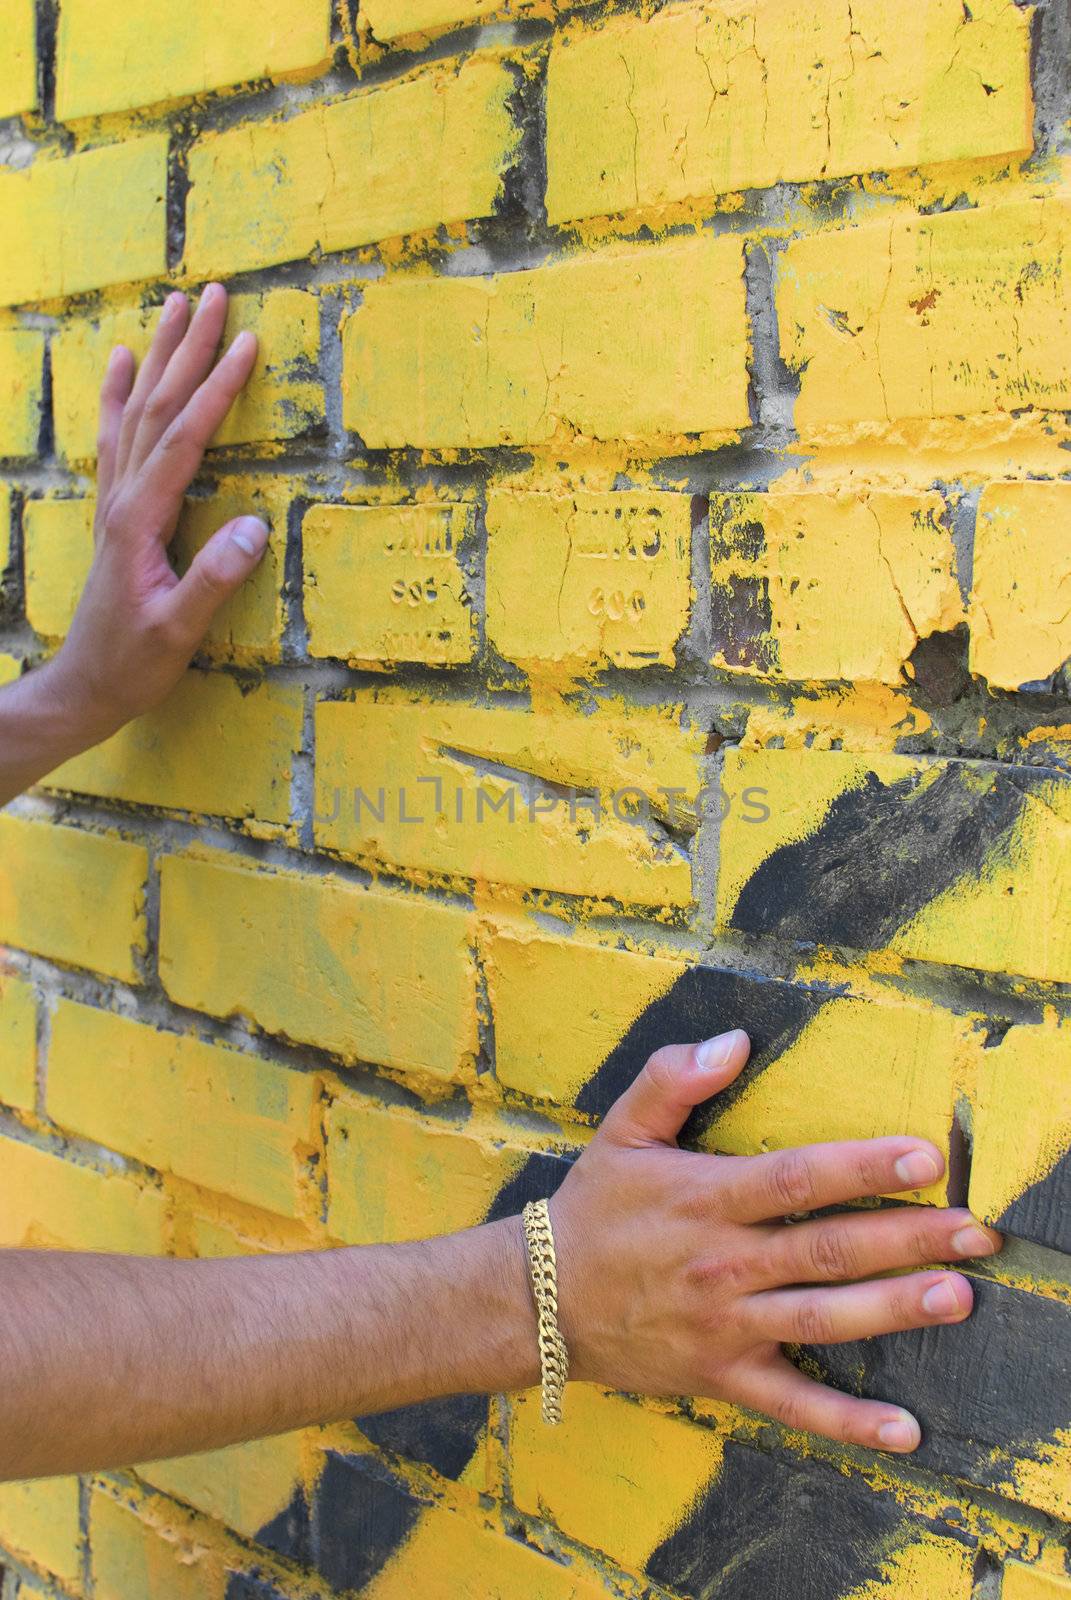 Hands of the young man are touching the wall. There is a yellow bracelet on right arm.